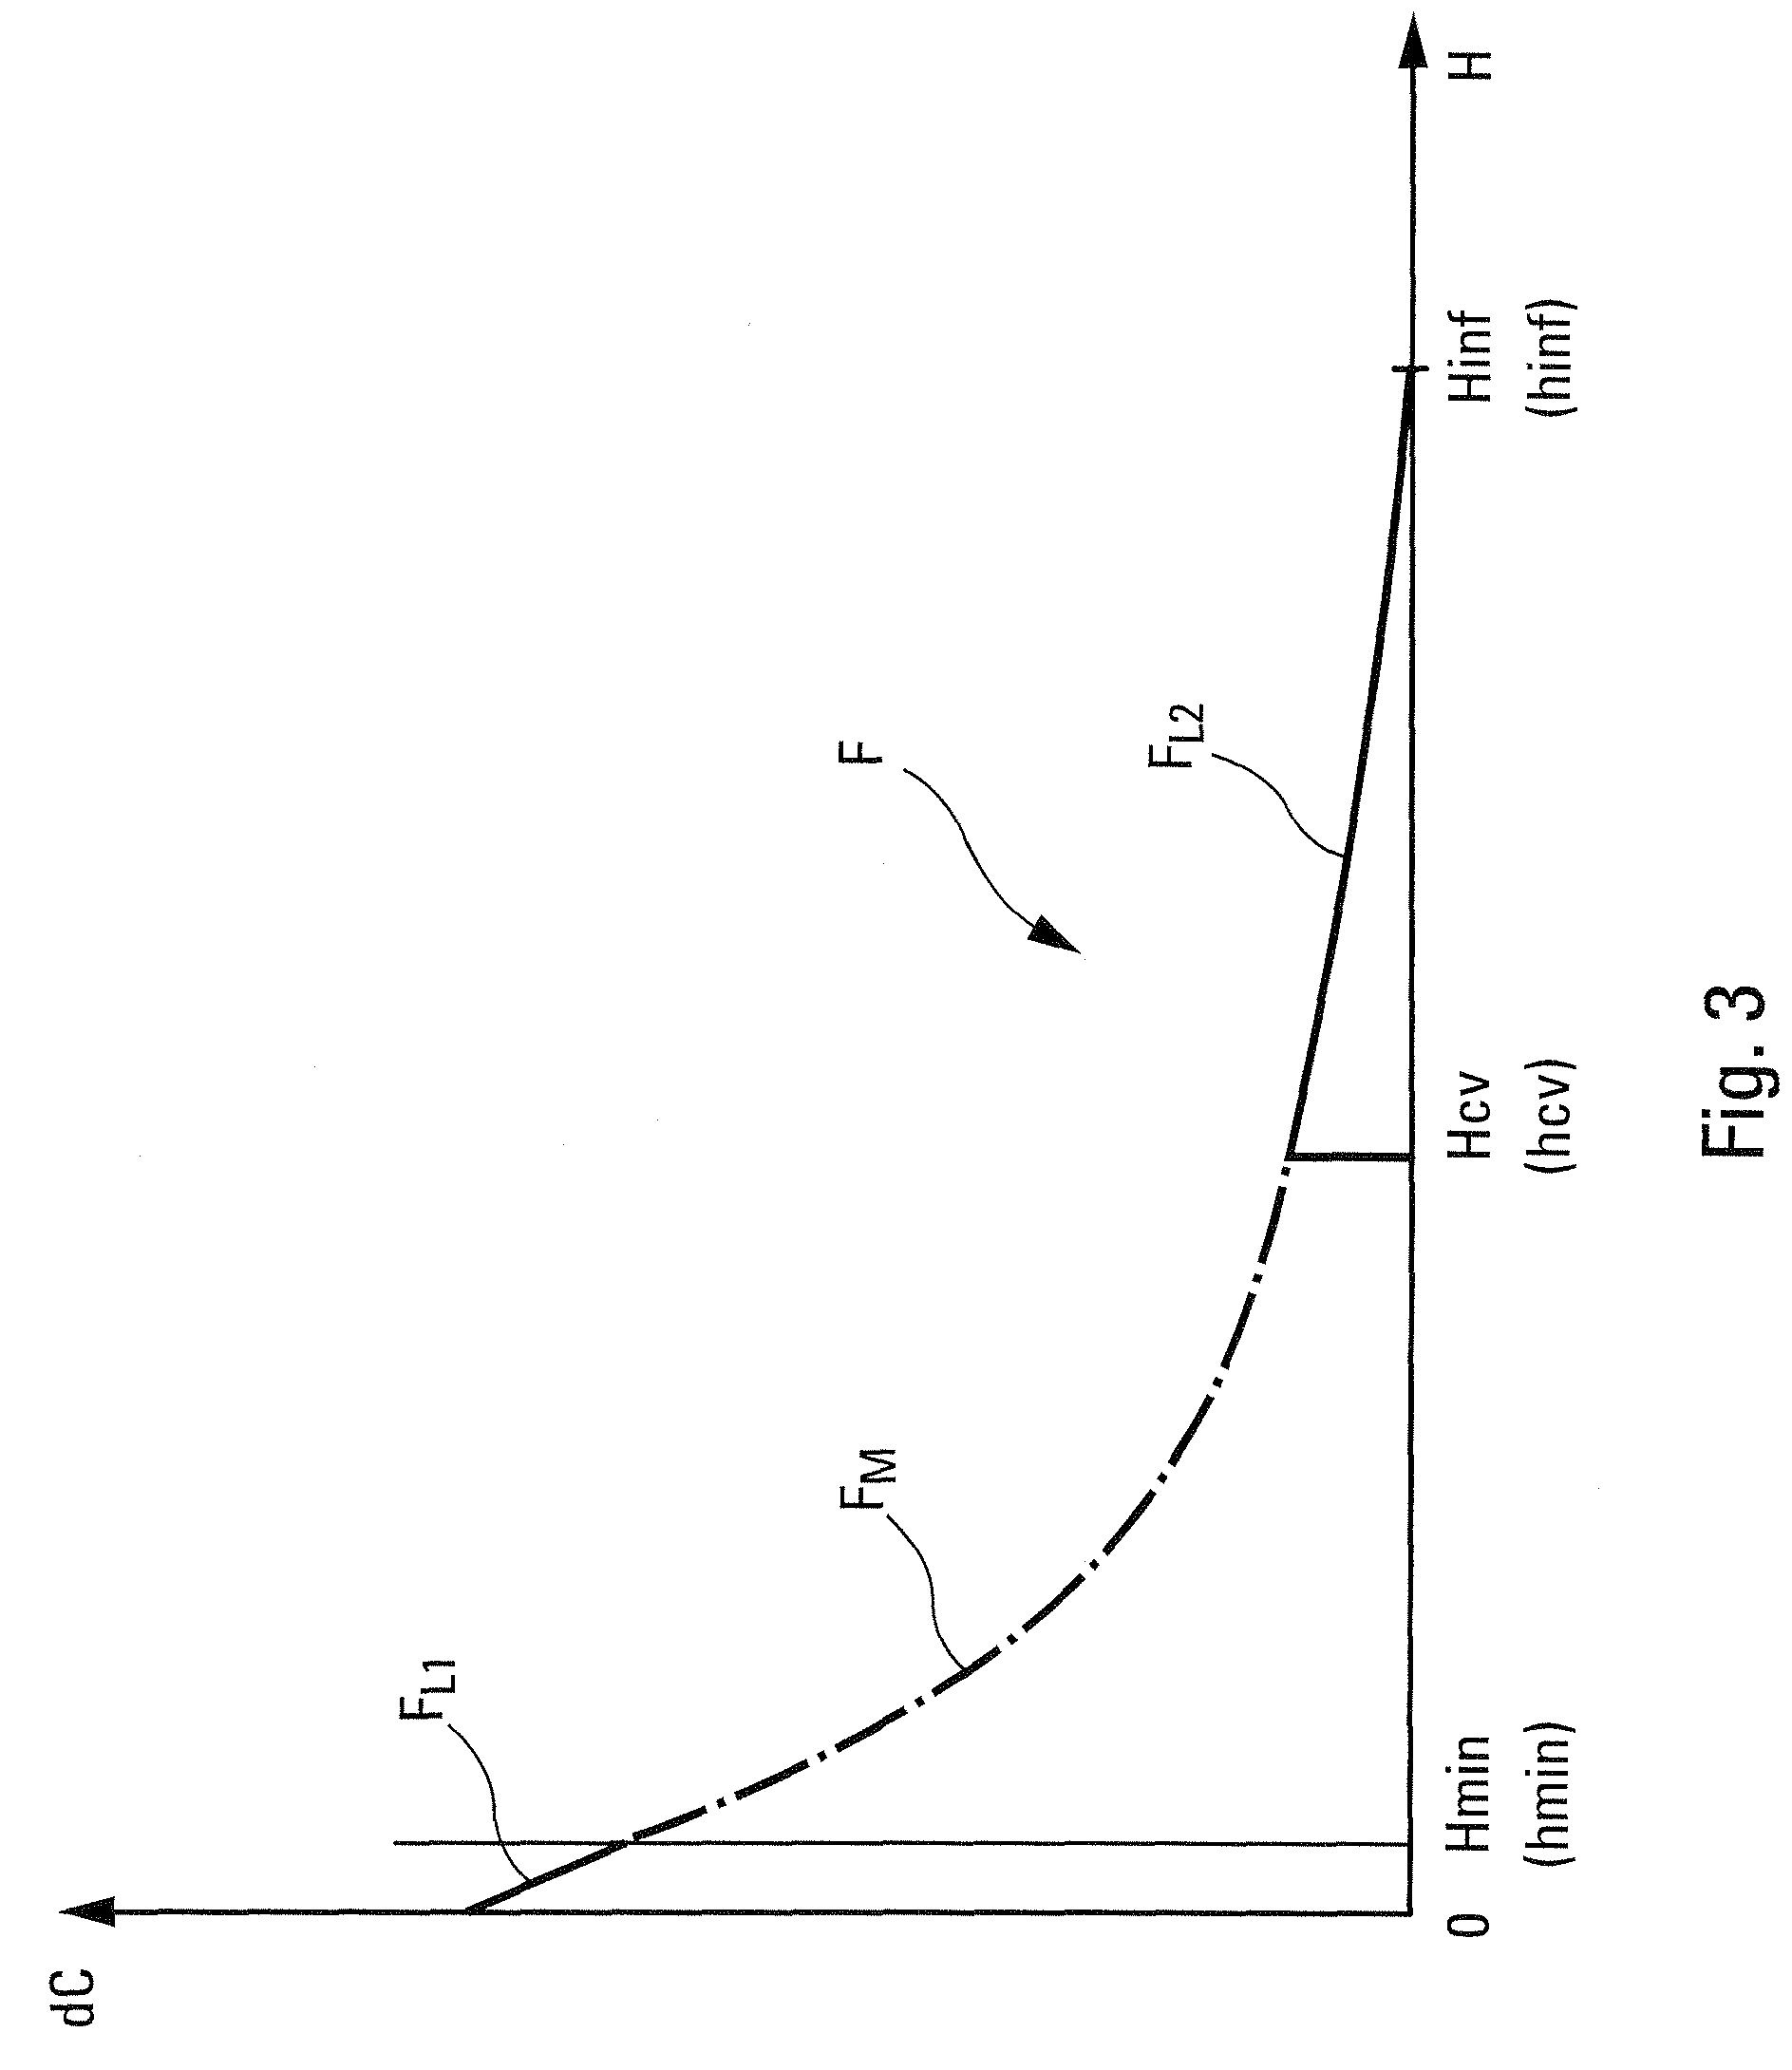 Hybrid method for estimating the ground effect on an aircraft